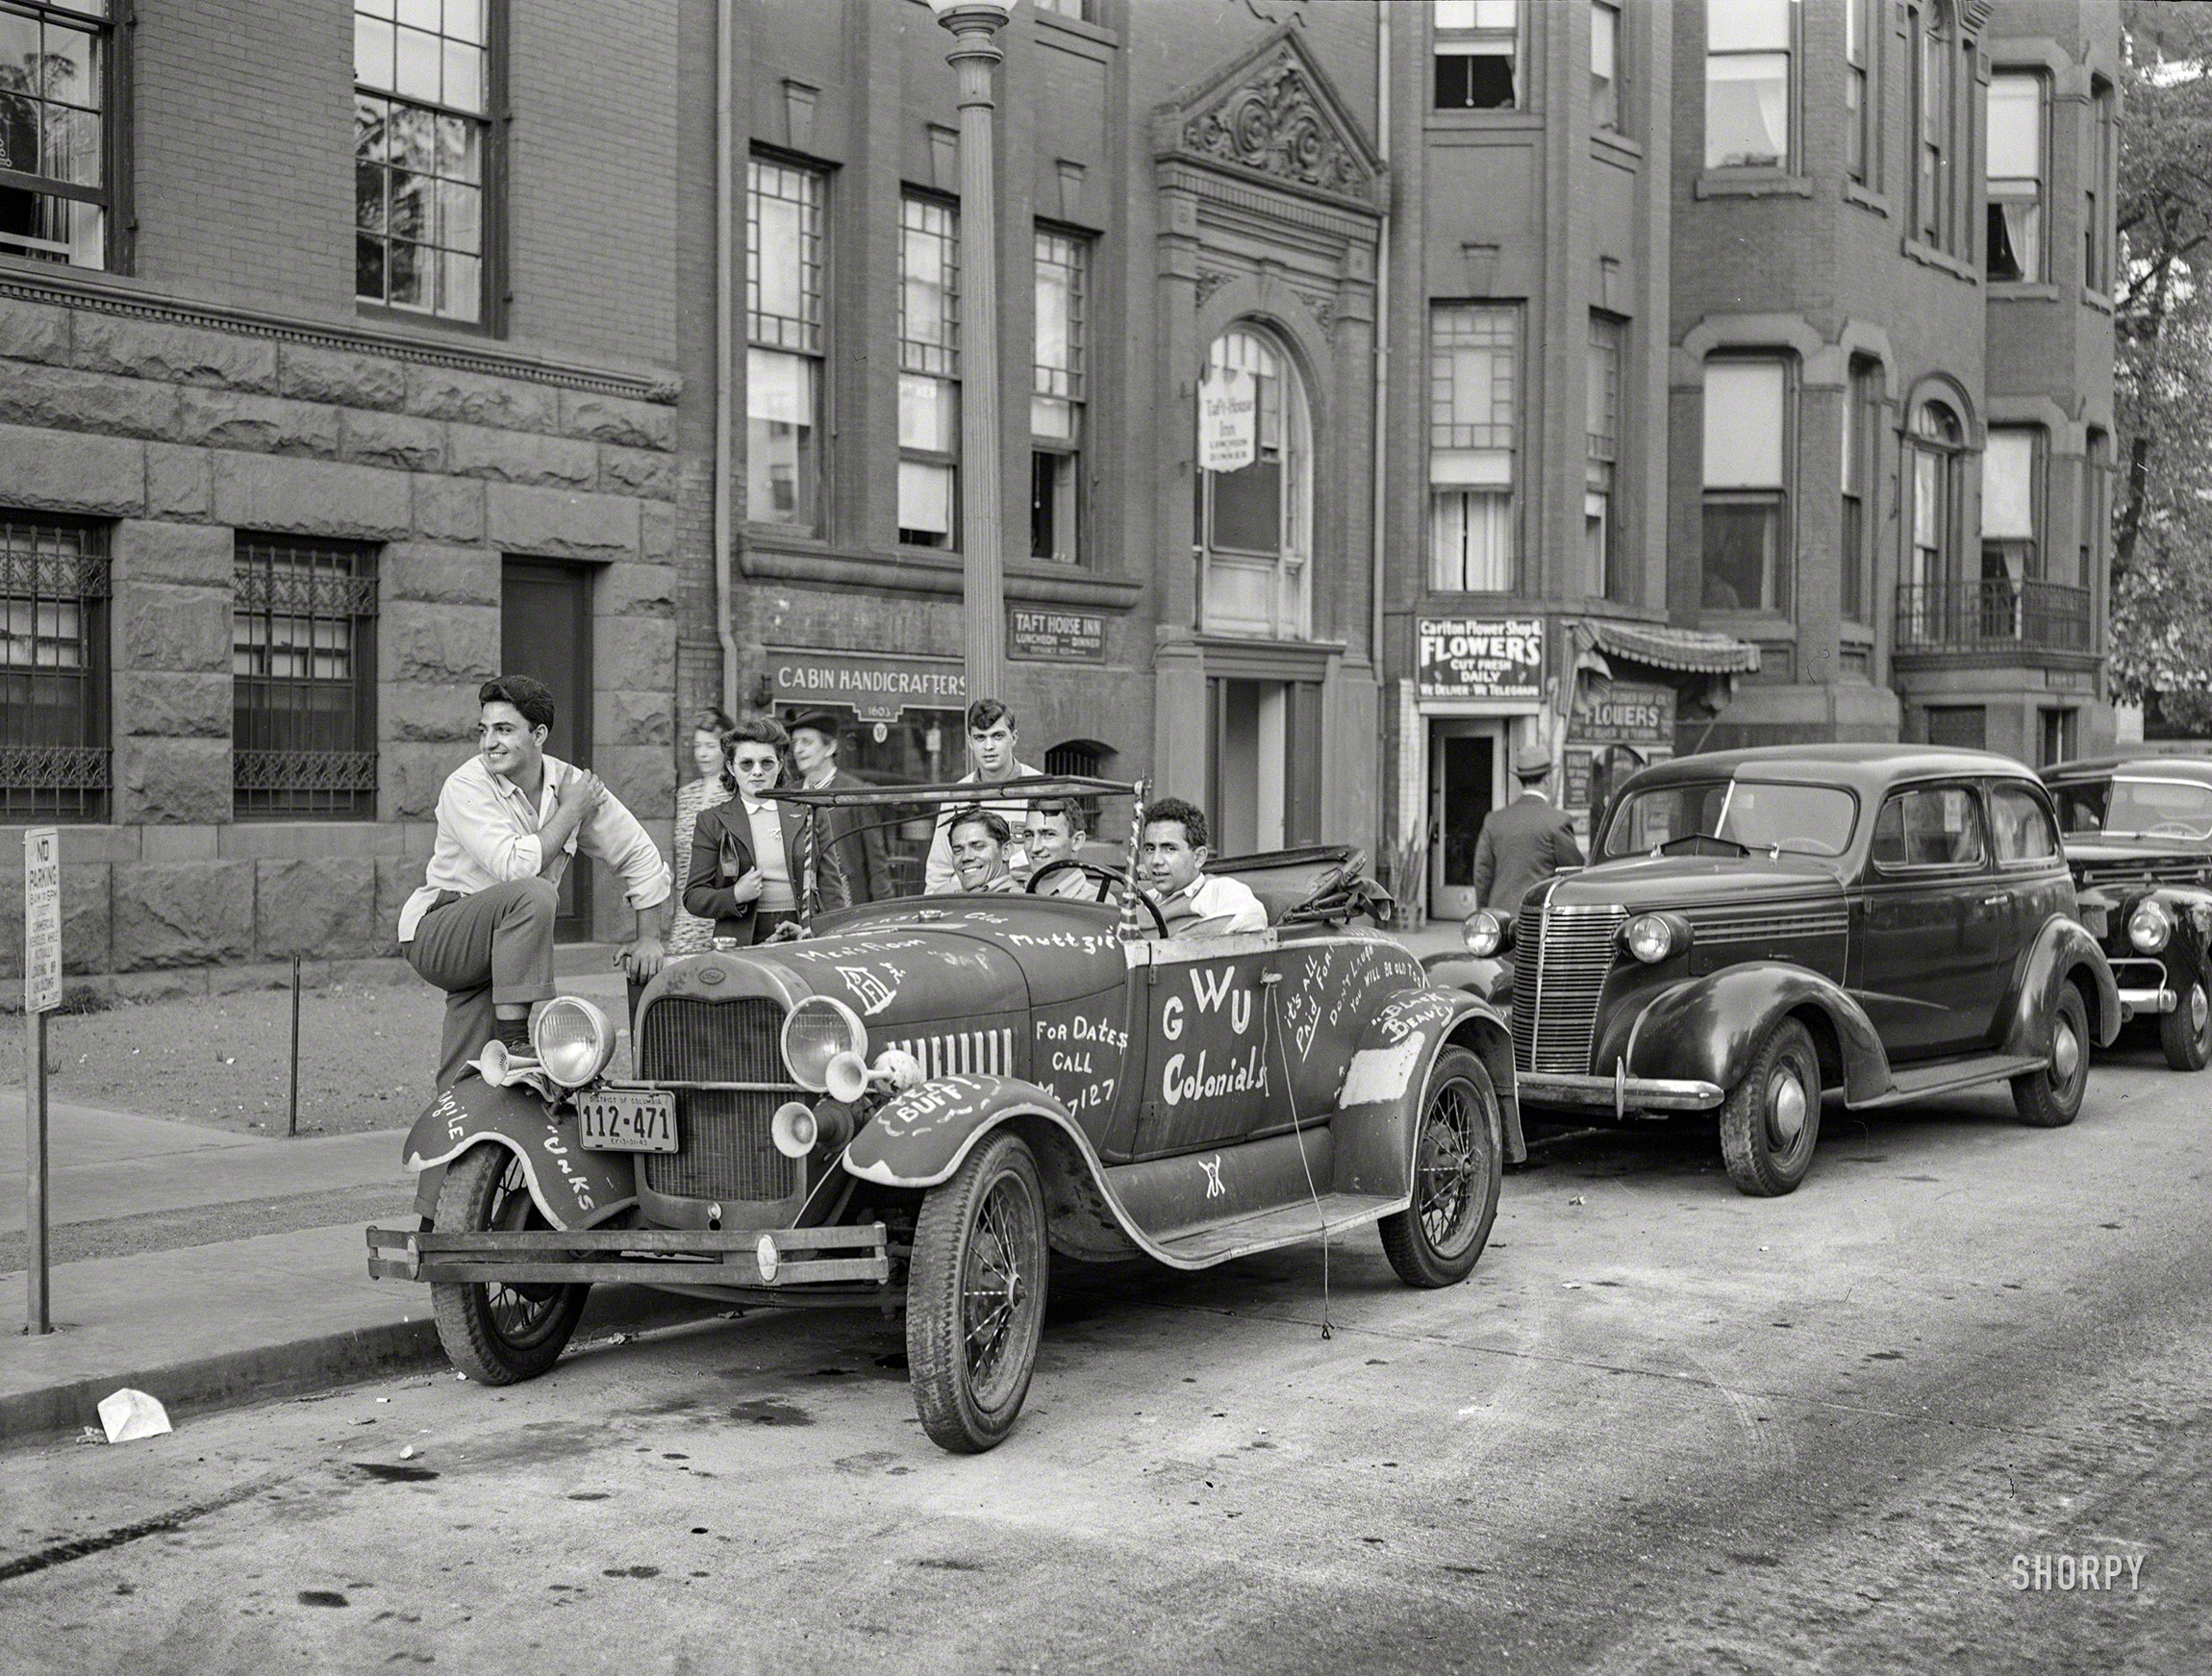 May 1942. Washington, D.C. "Student's car in front of University Club on K Street N.W." Our second glimpse of these collegiate Colonials and their graffiti-garnished jalopy. Medium format acetate negative by John Ferrell for the Office of War Information. View full size.